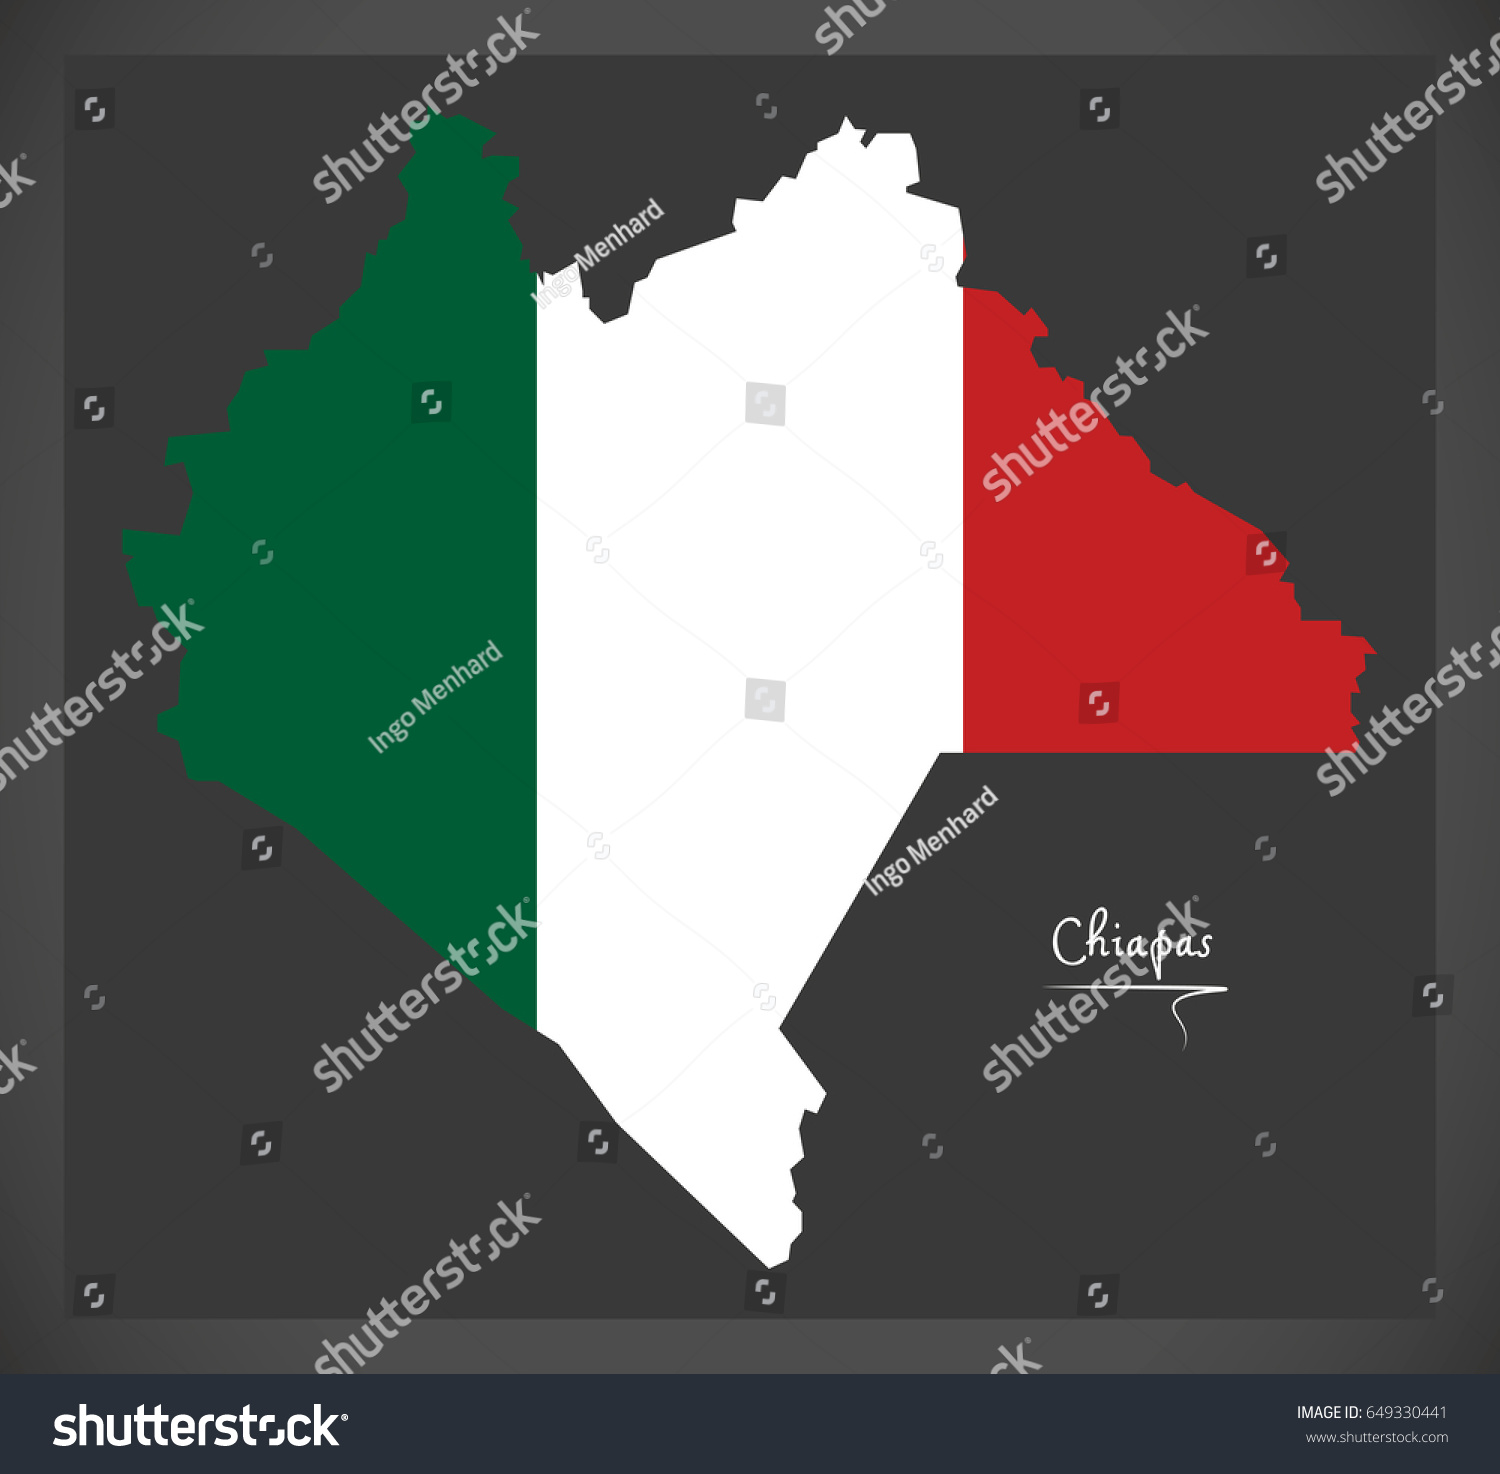 Chiapas Map With Mexican National Flag Royalty Free Stock Vector 649330441 1543